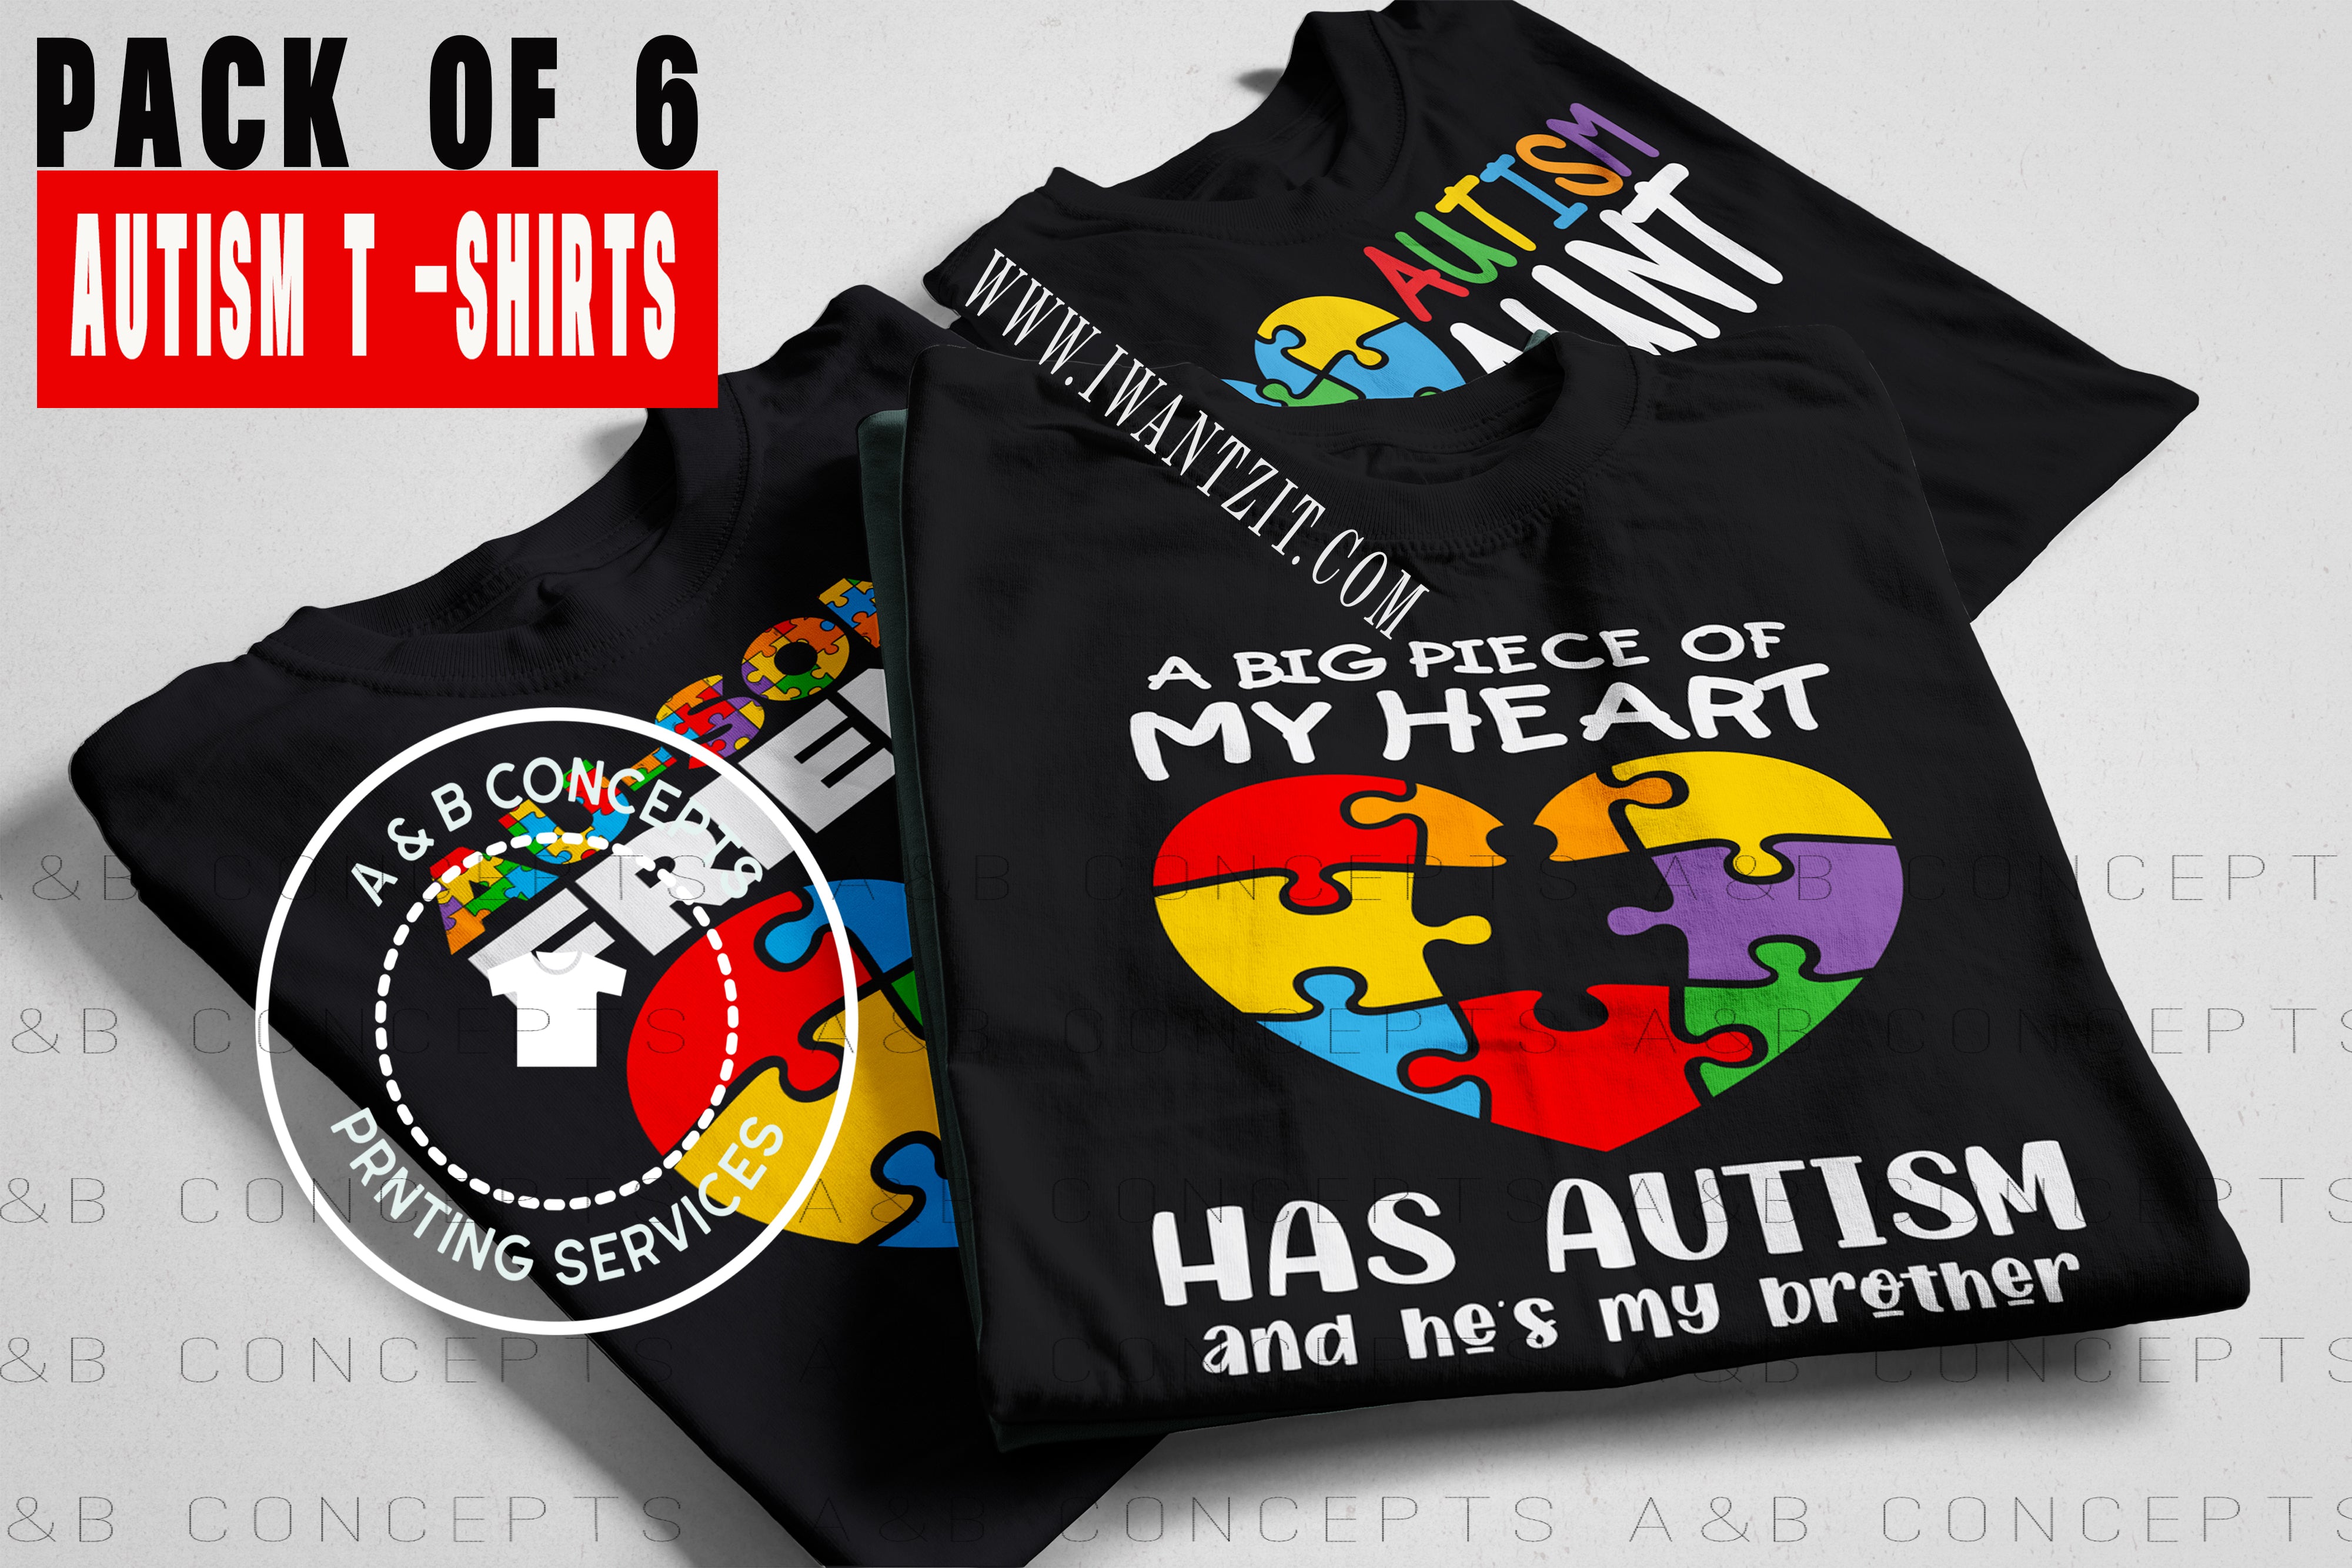 Support Autism T-shirt Pack of 6 Black T-shirts 100% Cotton Autism T-shirts (Pack Of 6) t-shirt A & B Concepts Large  